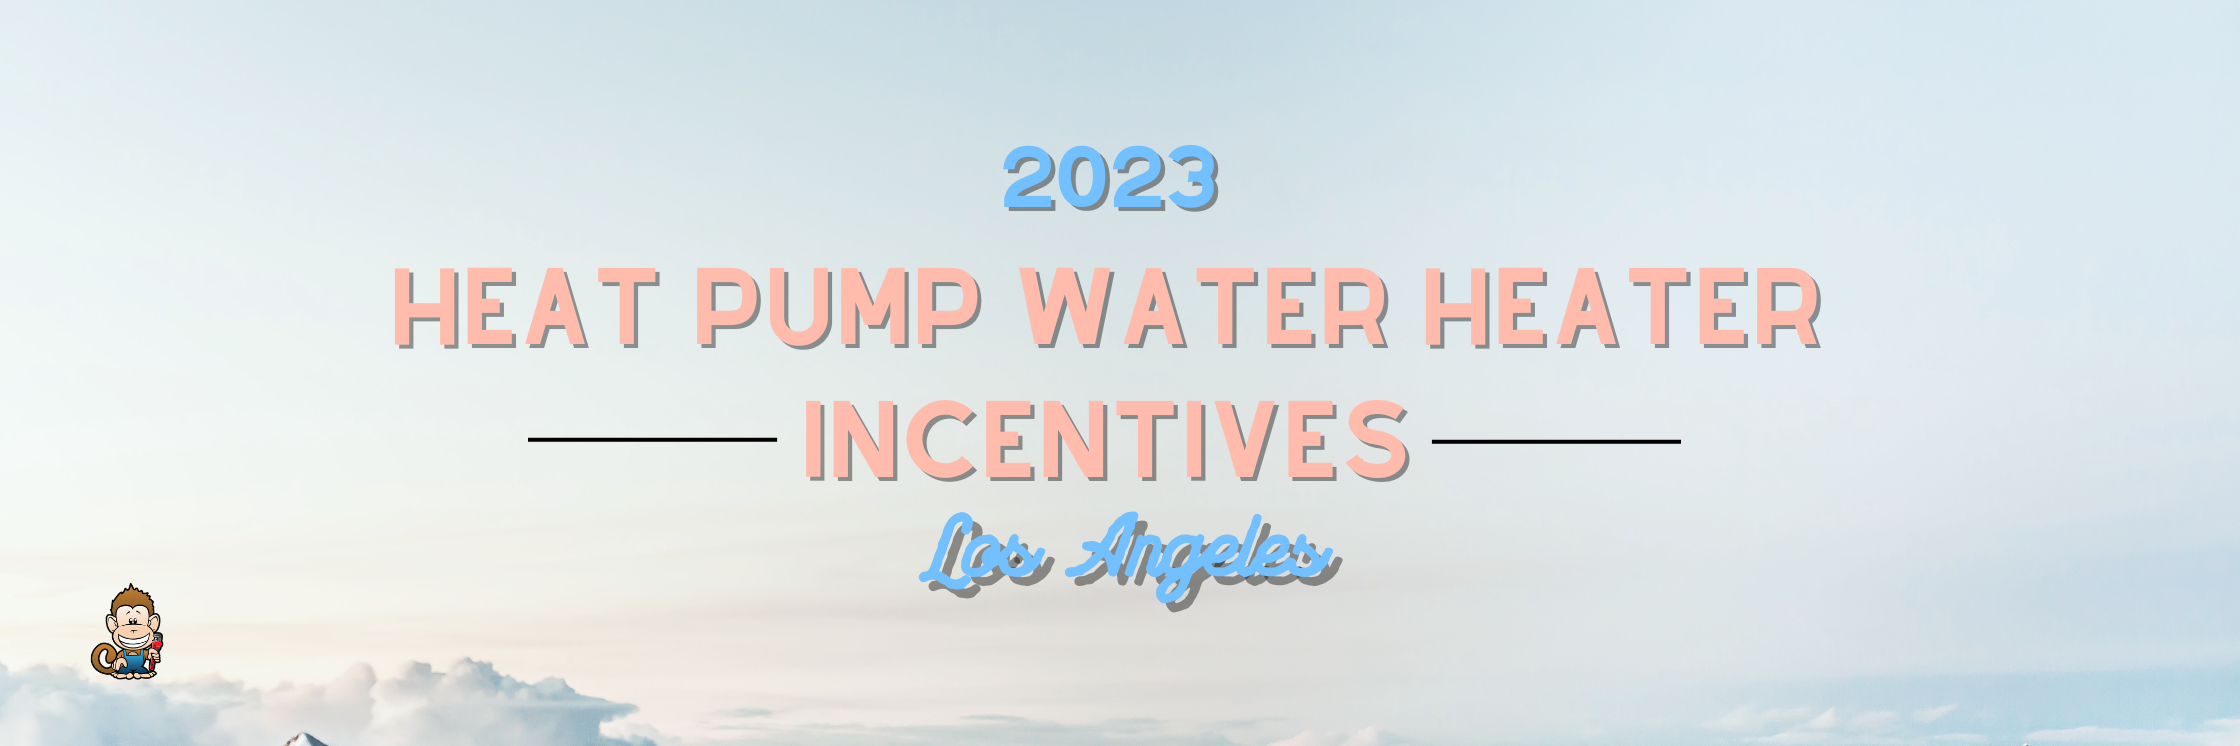 2023 Heat Pump Water Heater Incentives for Los Angeles